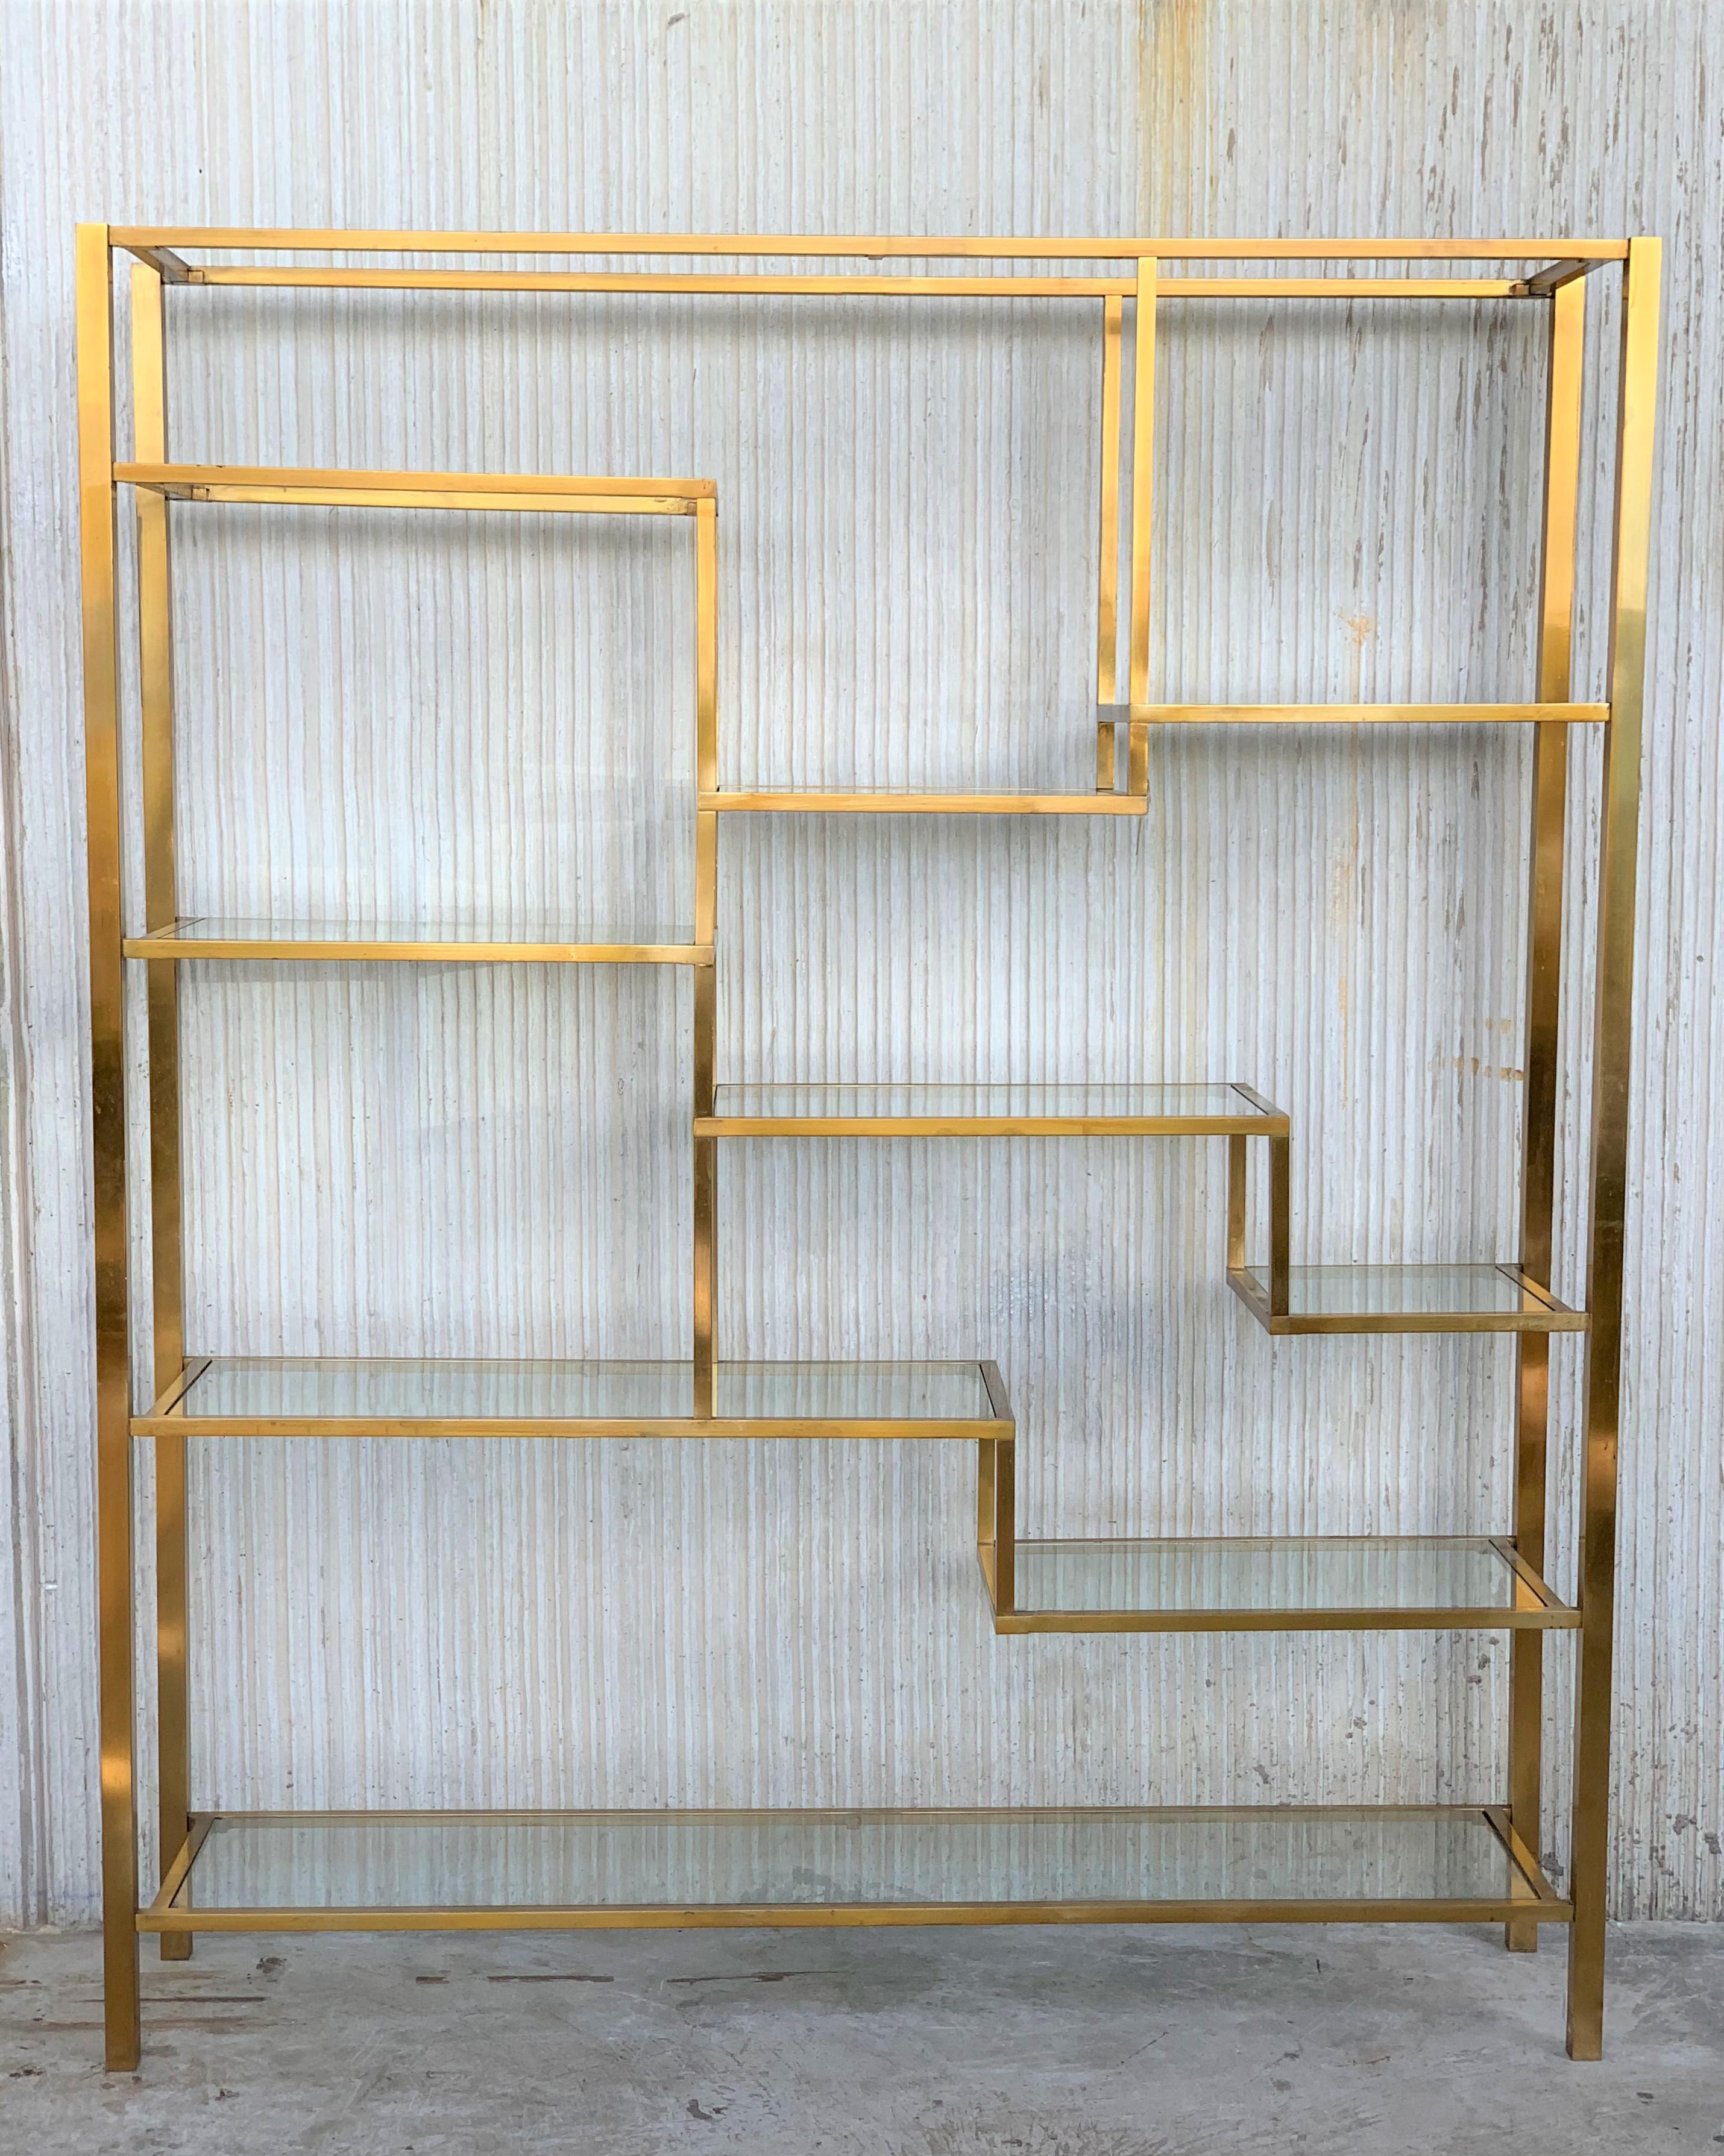 Very nice gold shelf o Bookcase from France. Very elegant and decorative. Typical for the Hollywood Regency era.

Typical patina on gilded shelves from the 1970s.